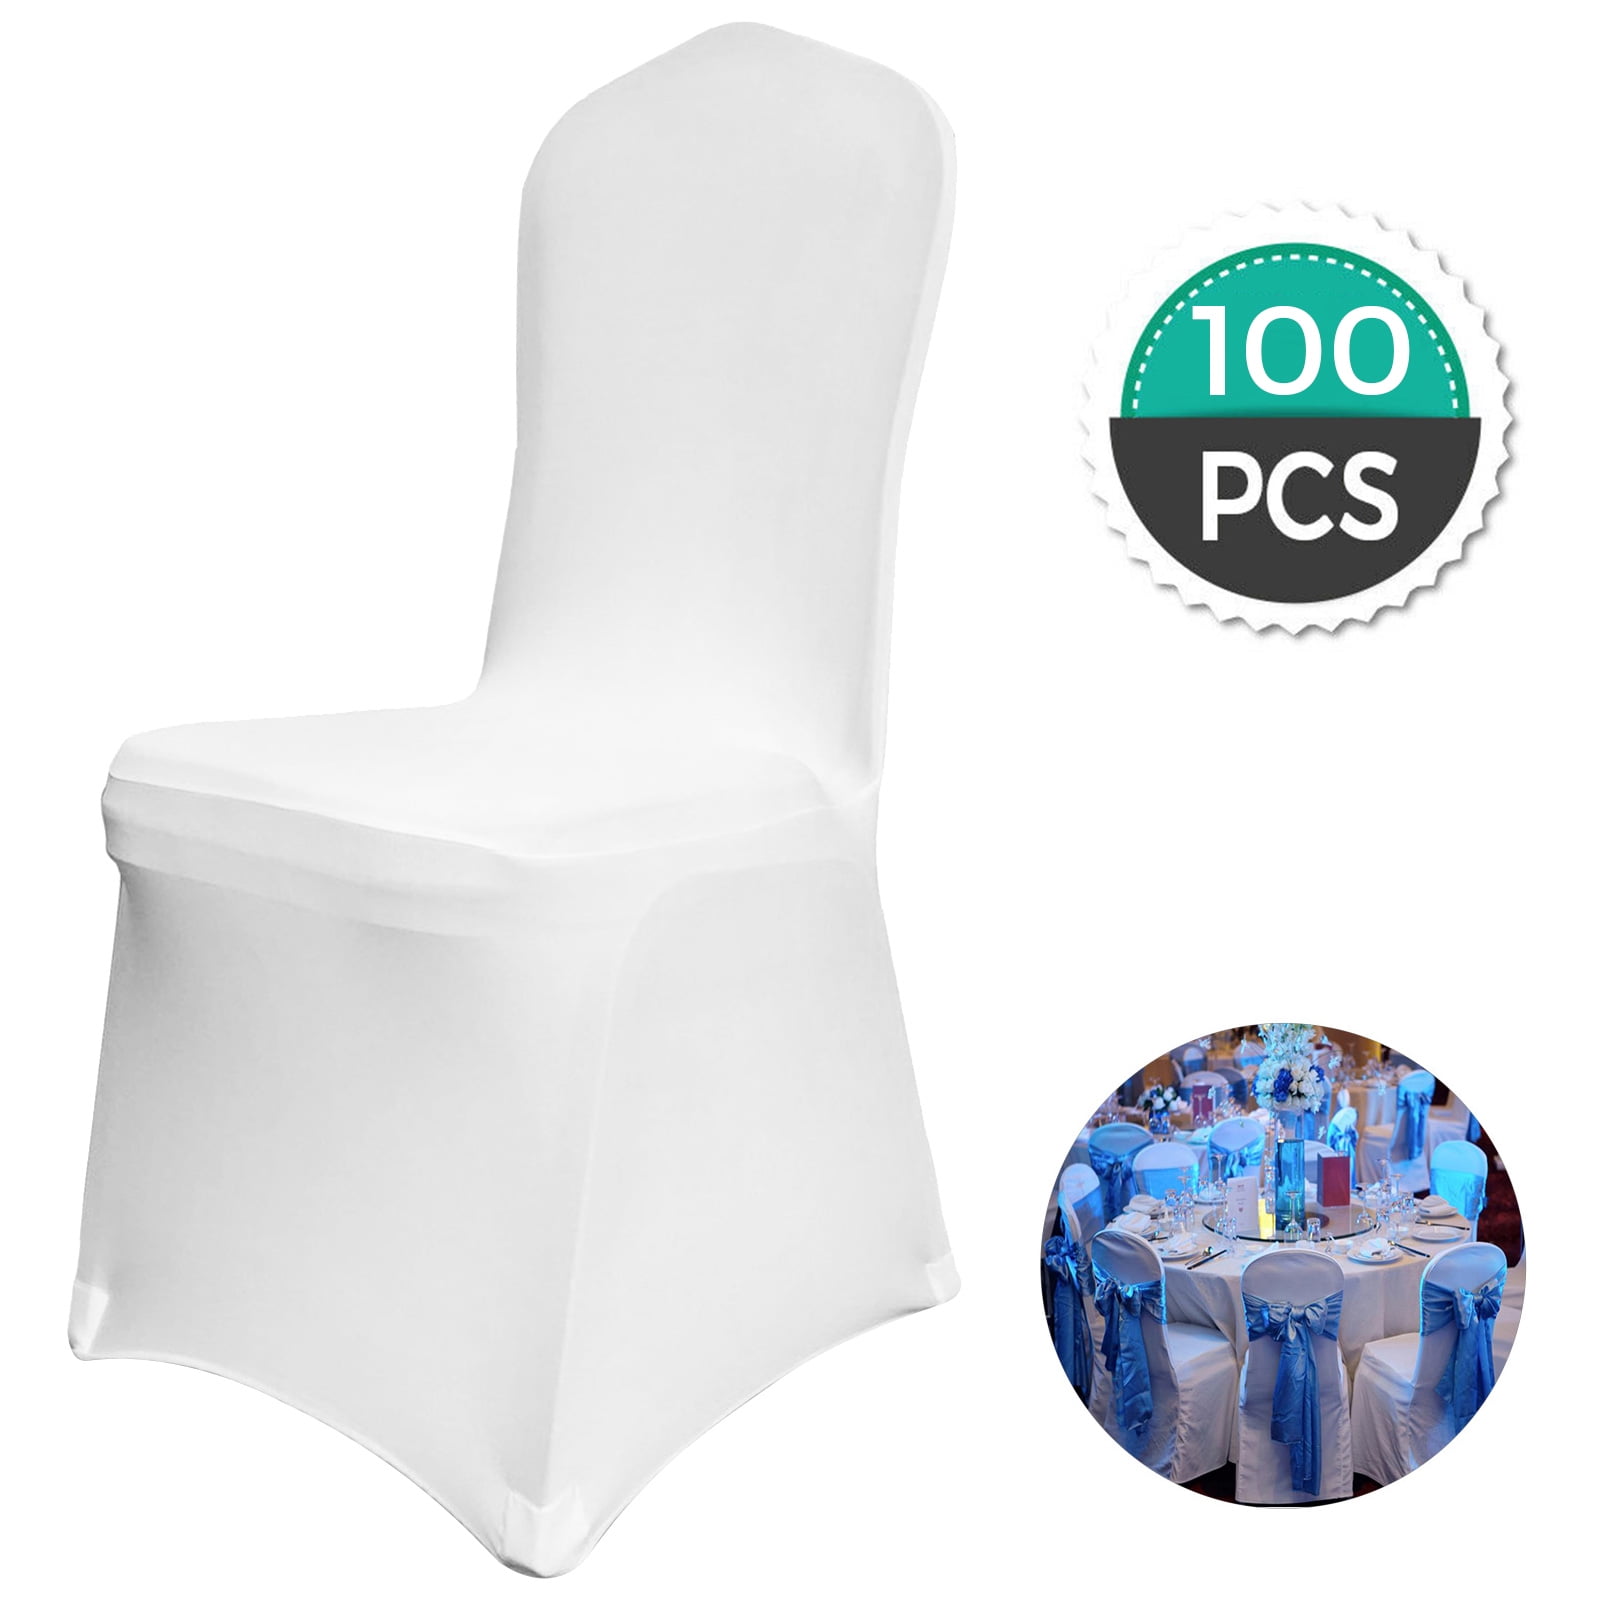 Spandex Stretch Banquet Chair Cover for Wedding Party Event Decor White 